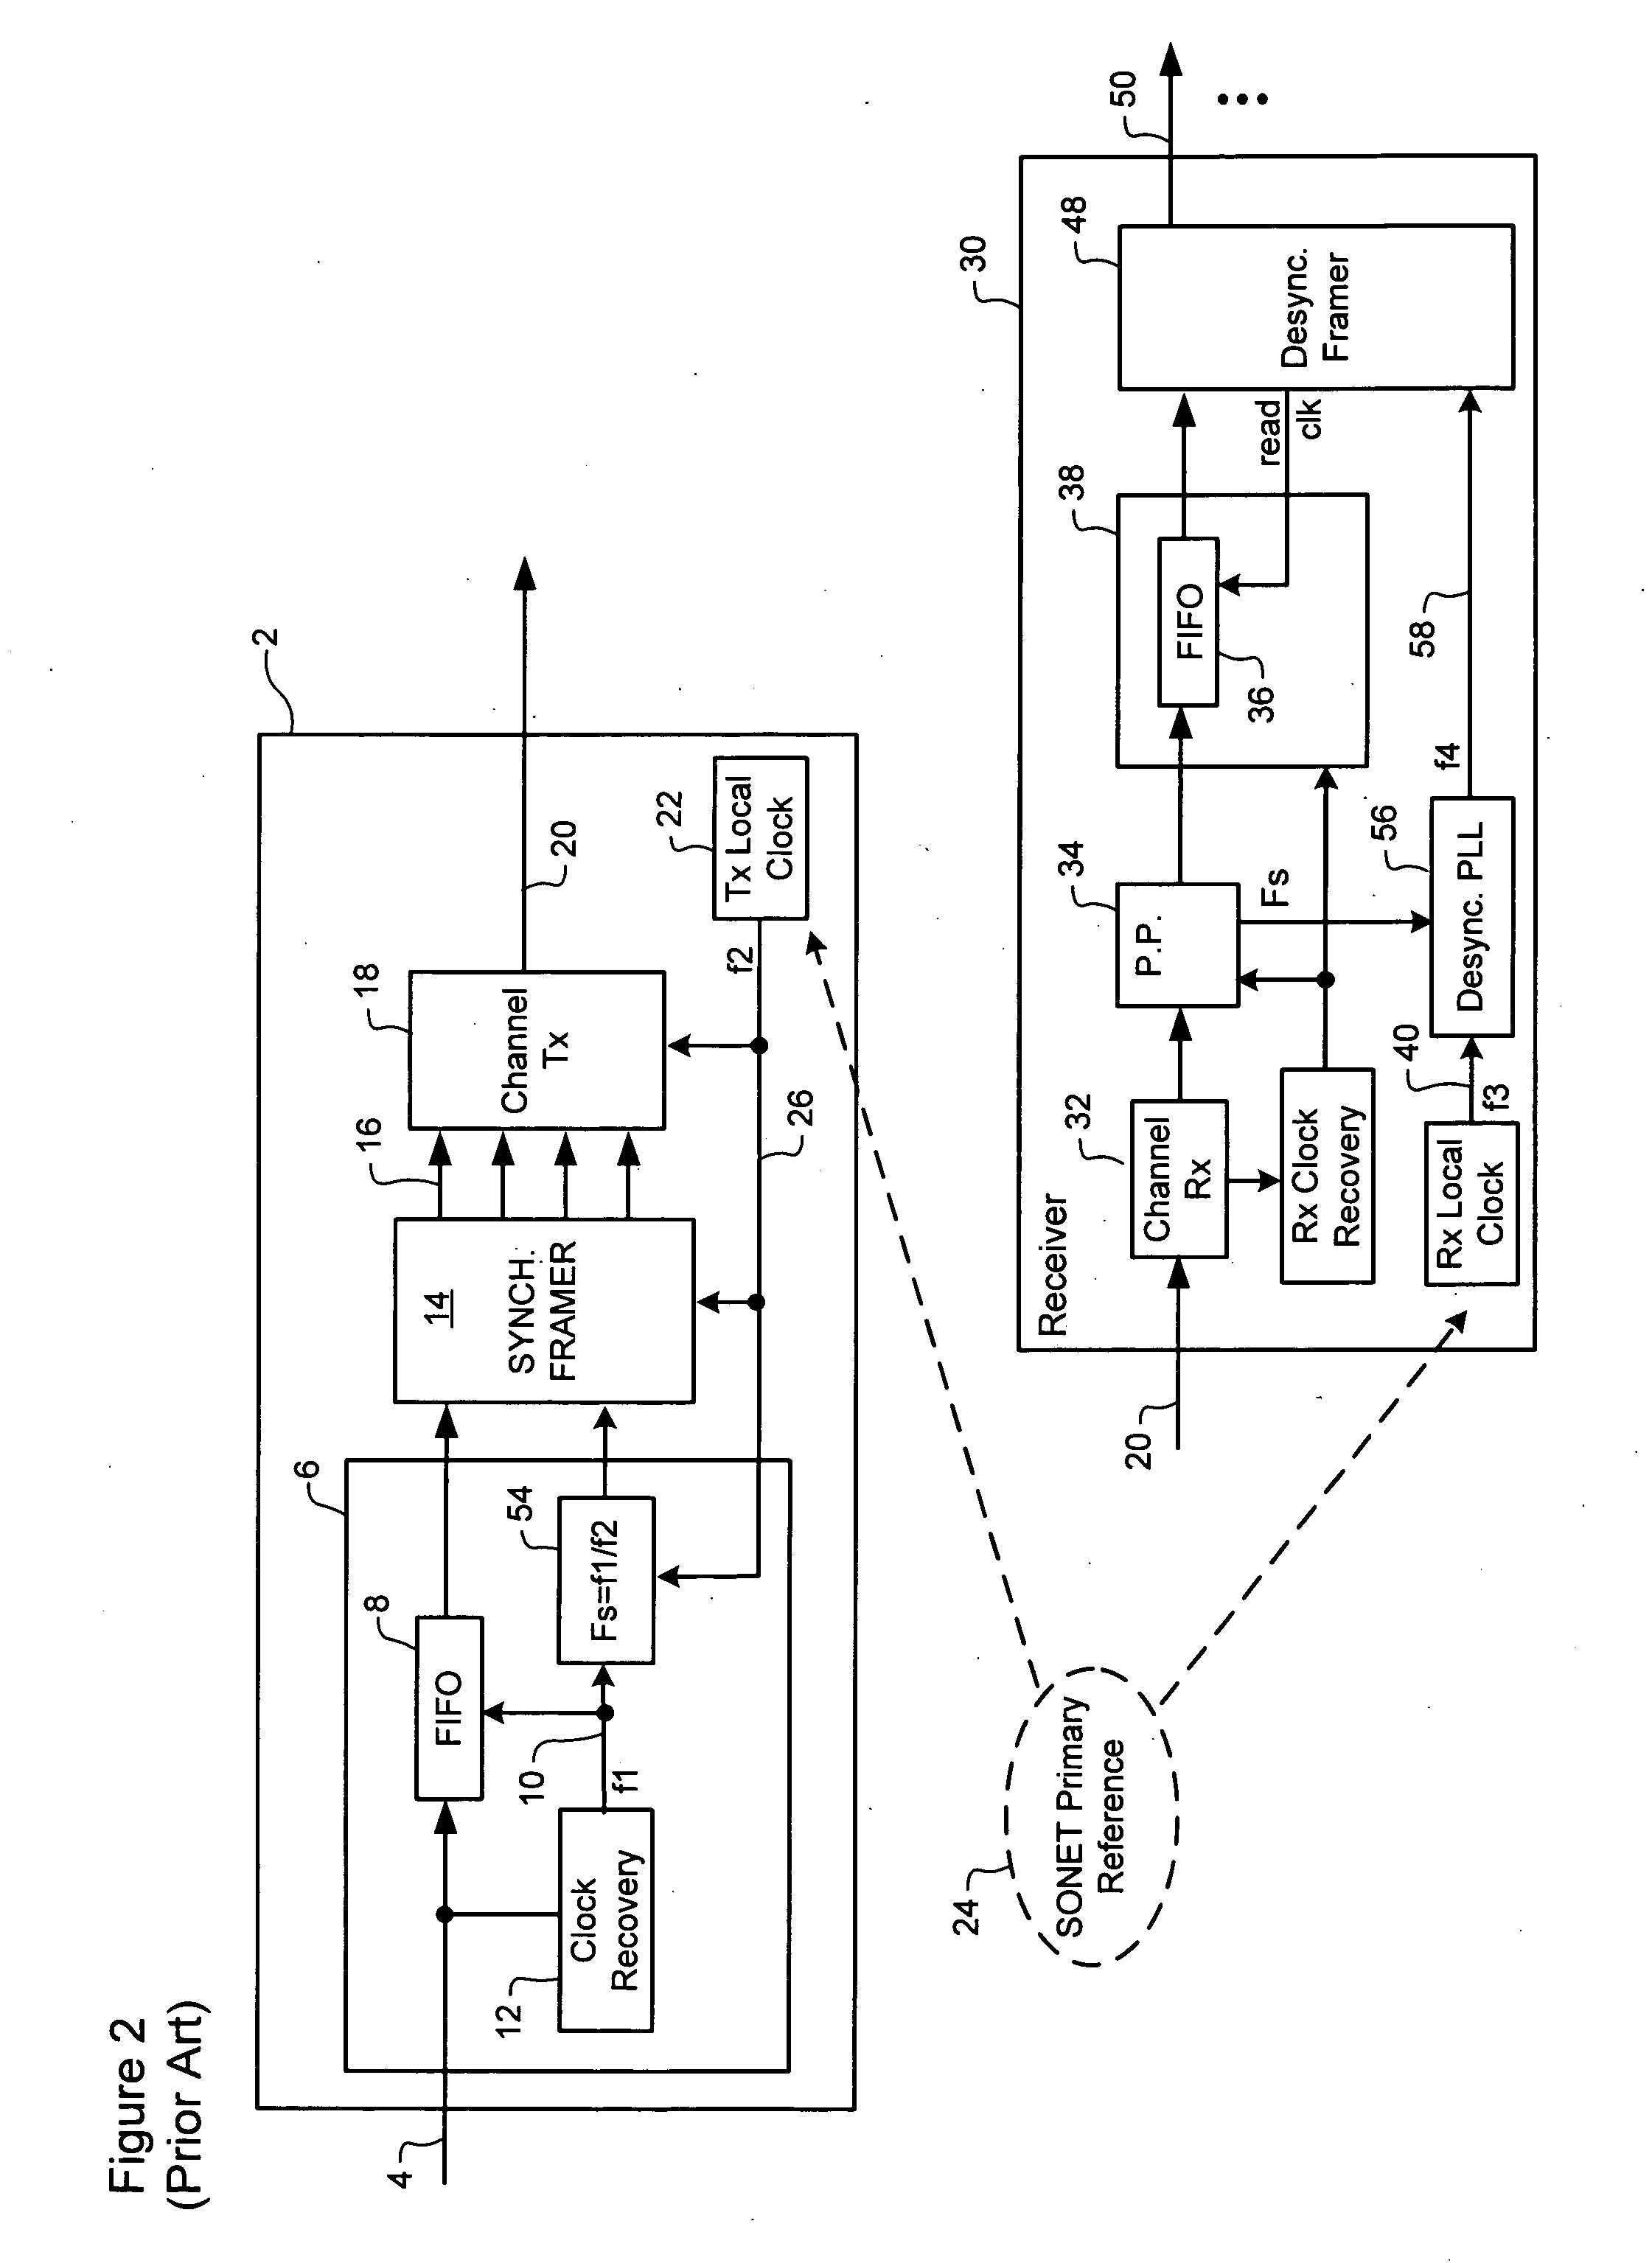 Methods and systems for reducing waiting-time jitter